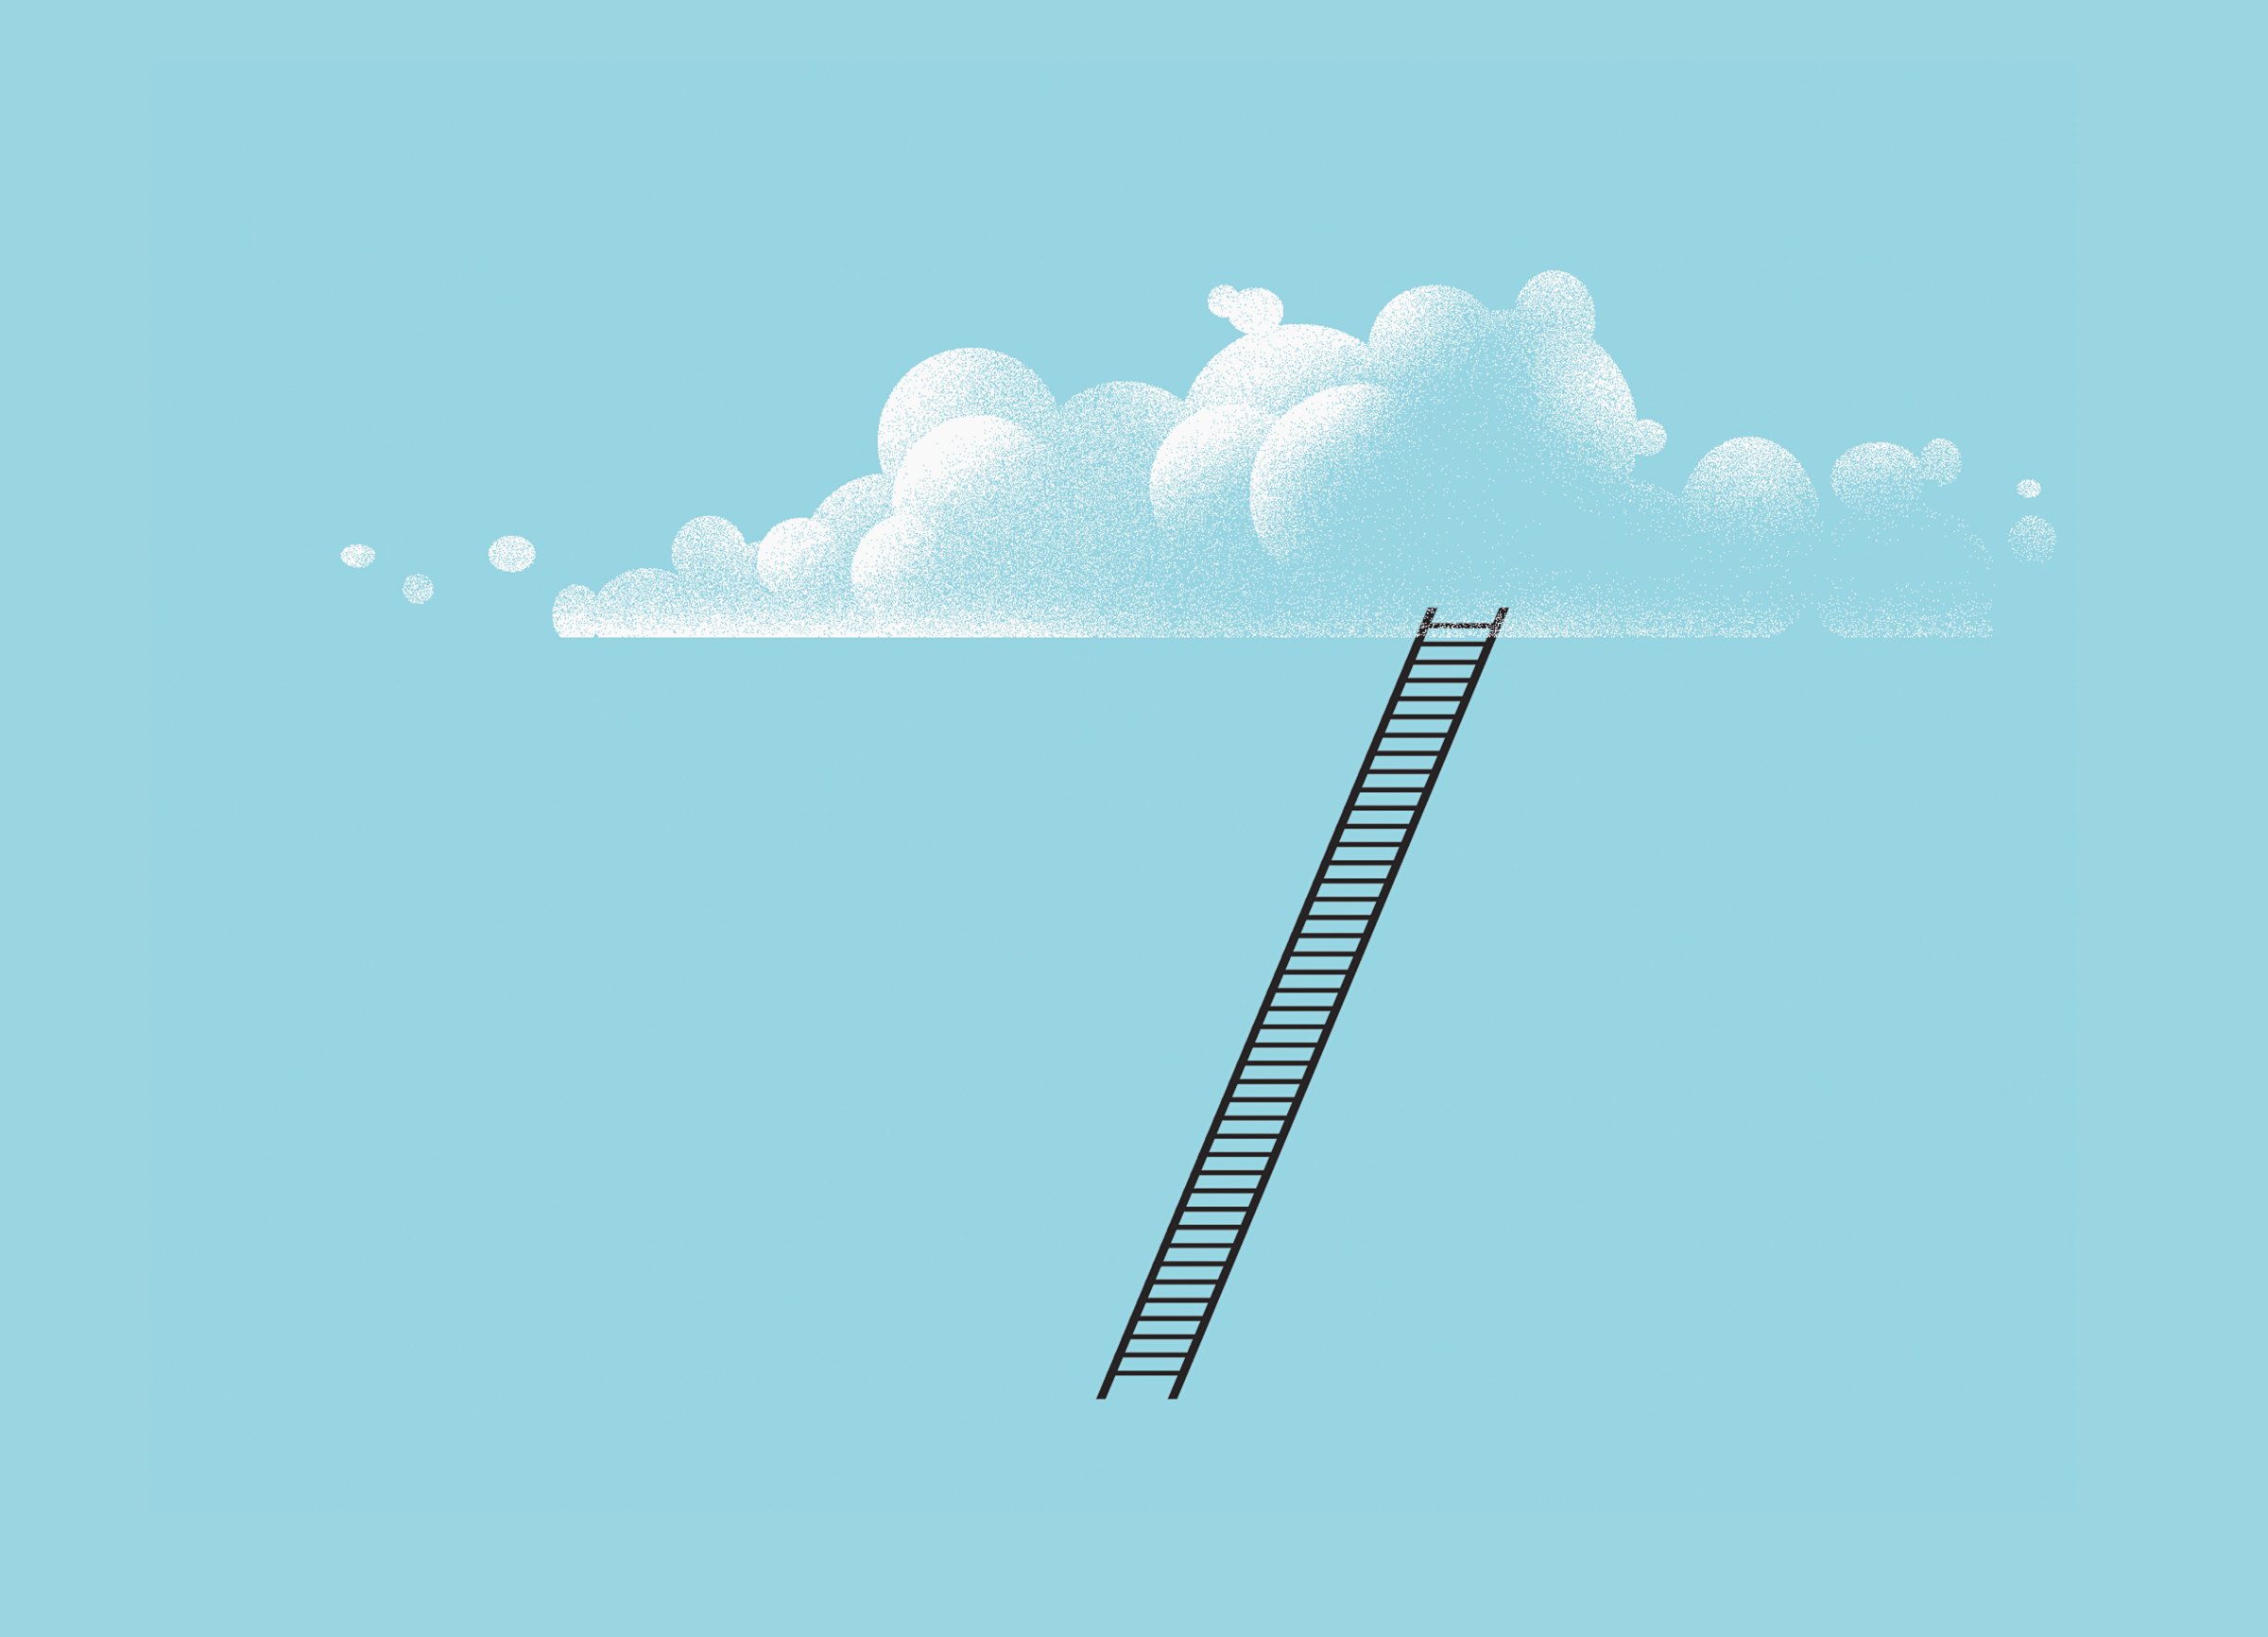 Ladder leaning on cloud